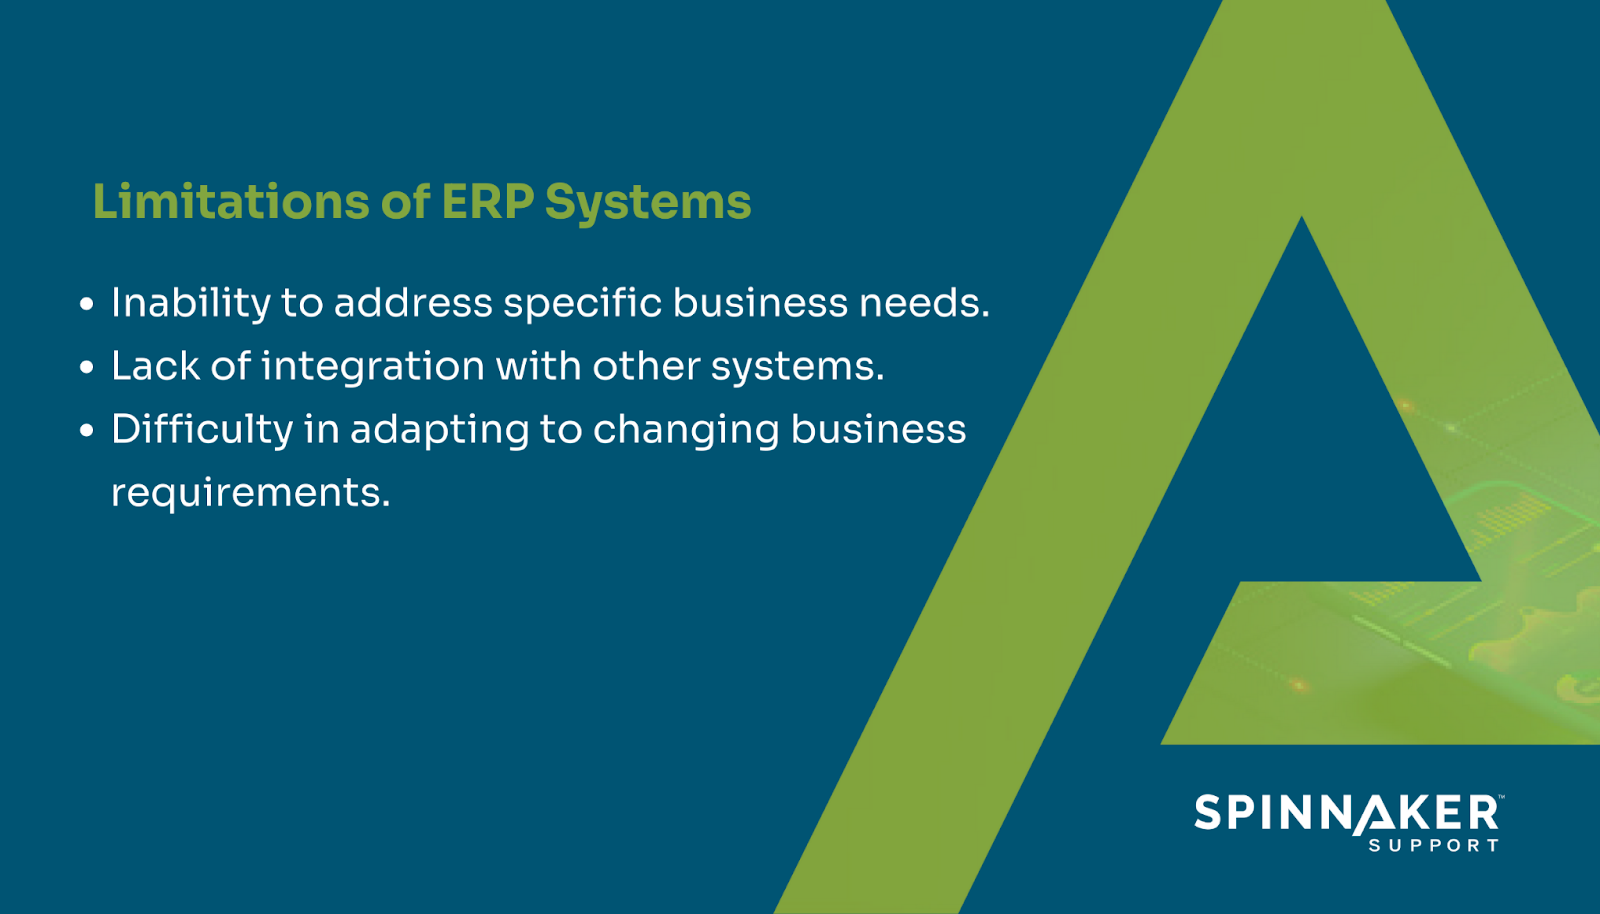 Some limitations of a standalone ERP system